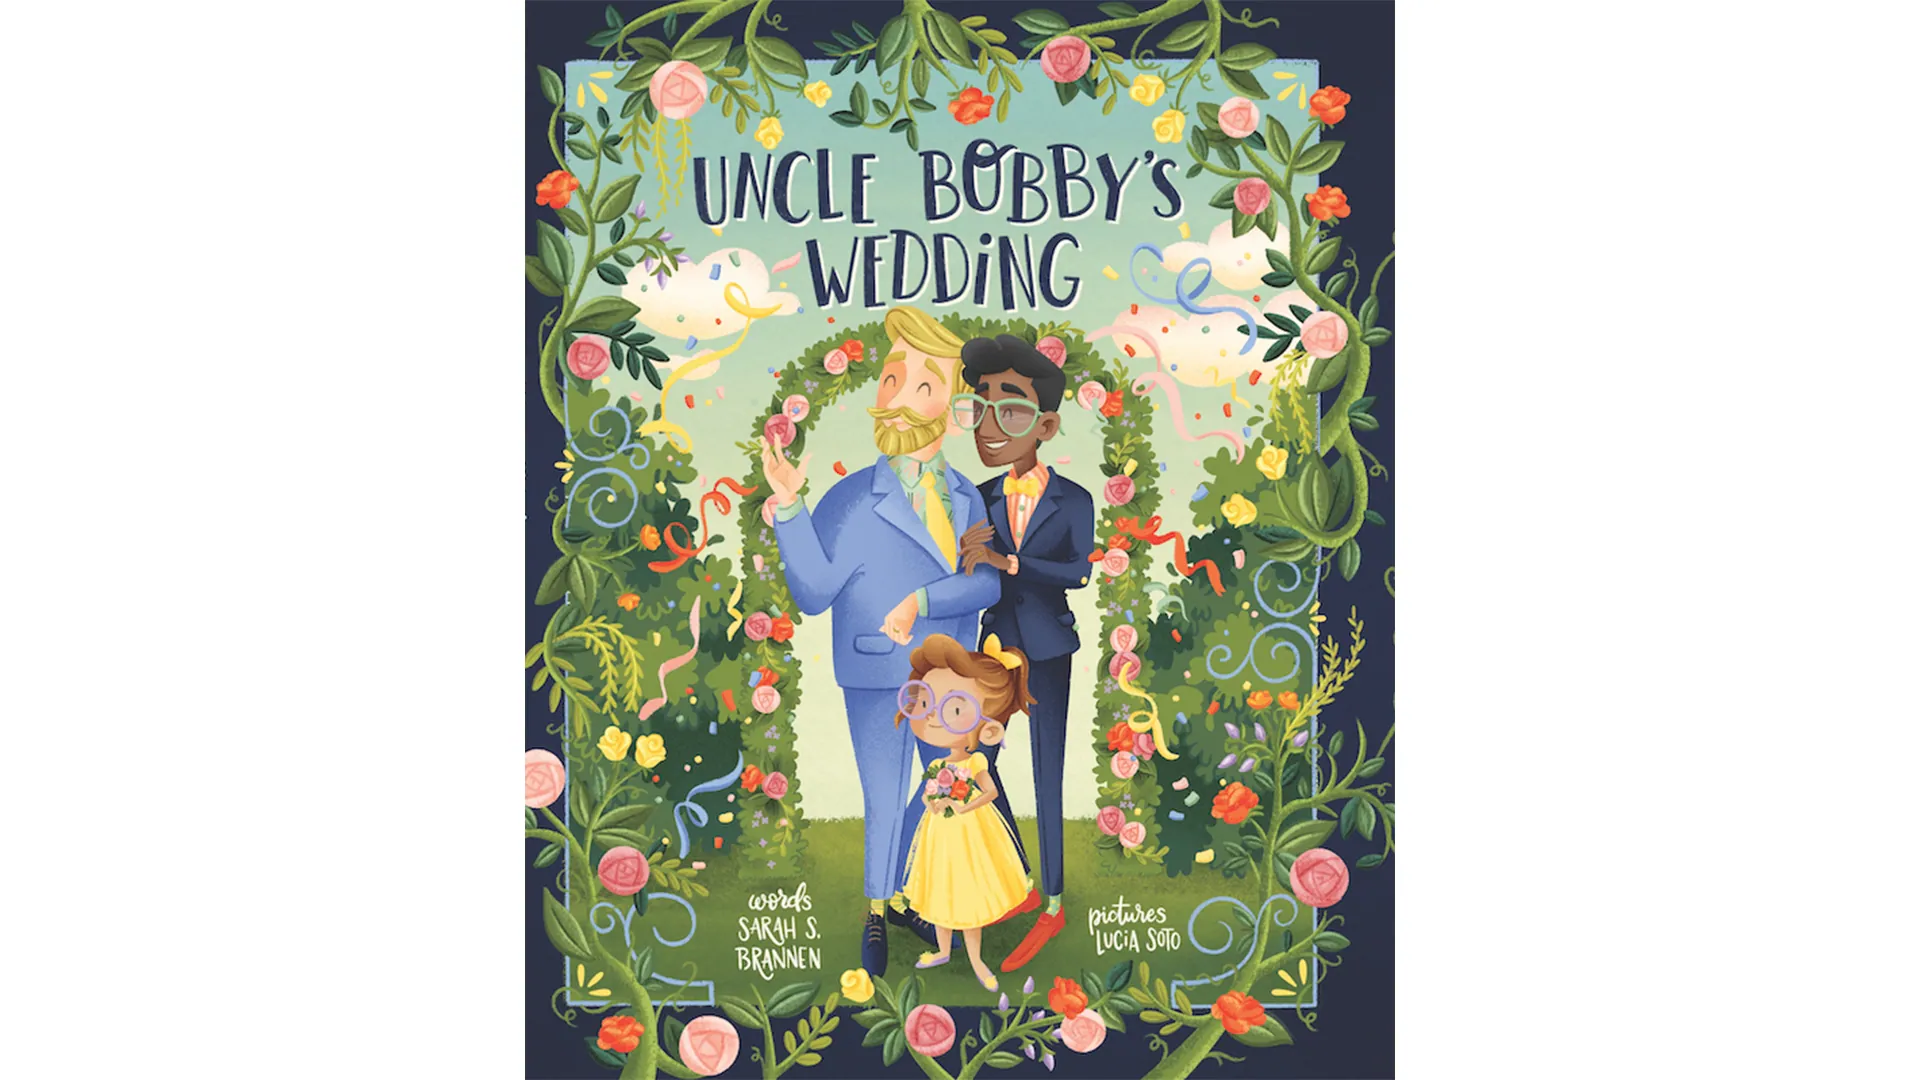 Sky Kids is developing ‘Uncle Bobby’s Wedding’ by Sarah S. Brannen, with Lightboat Media